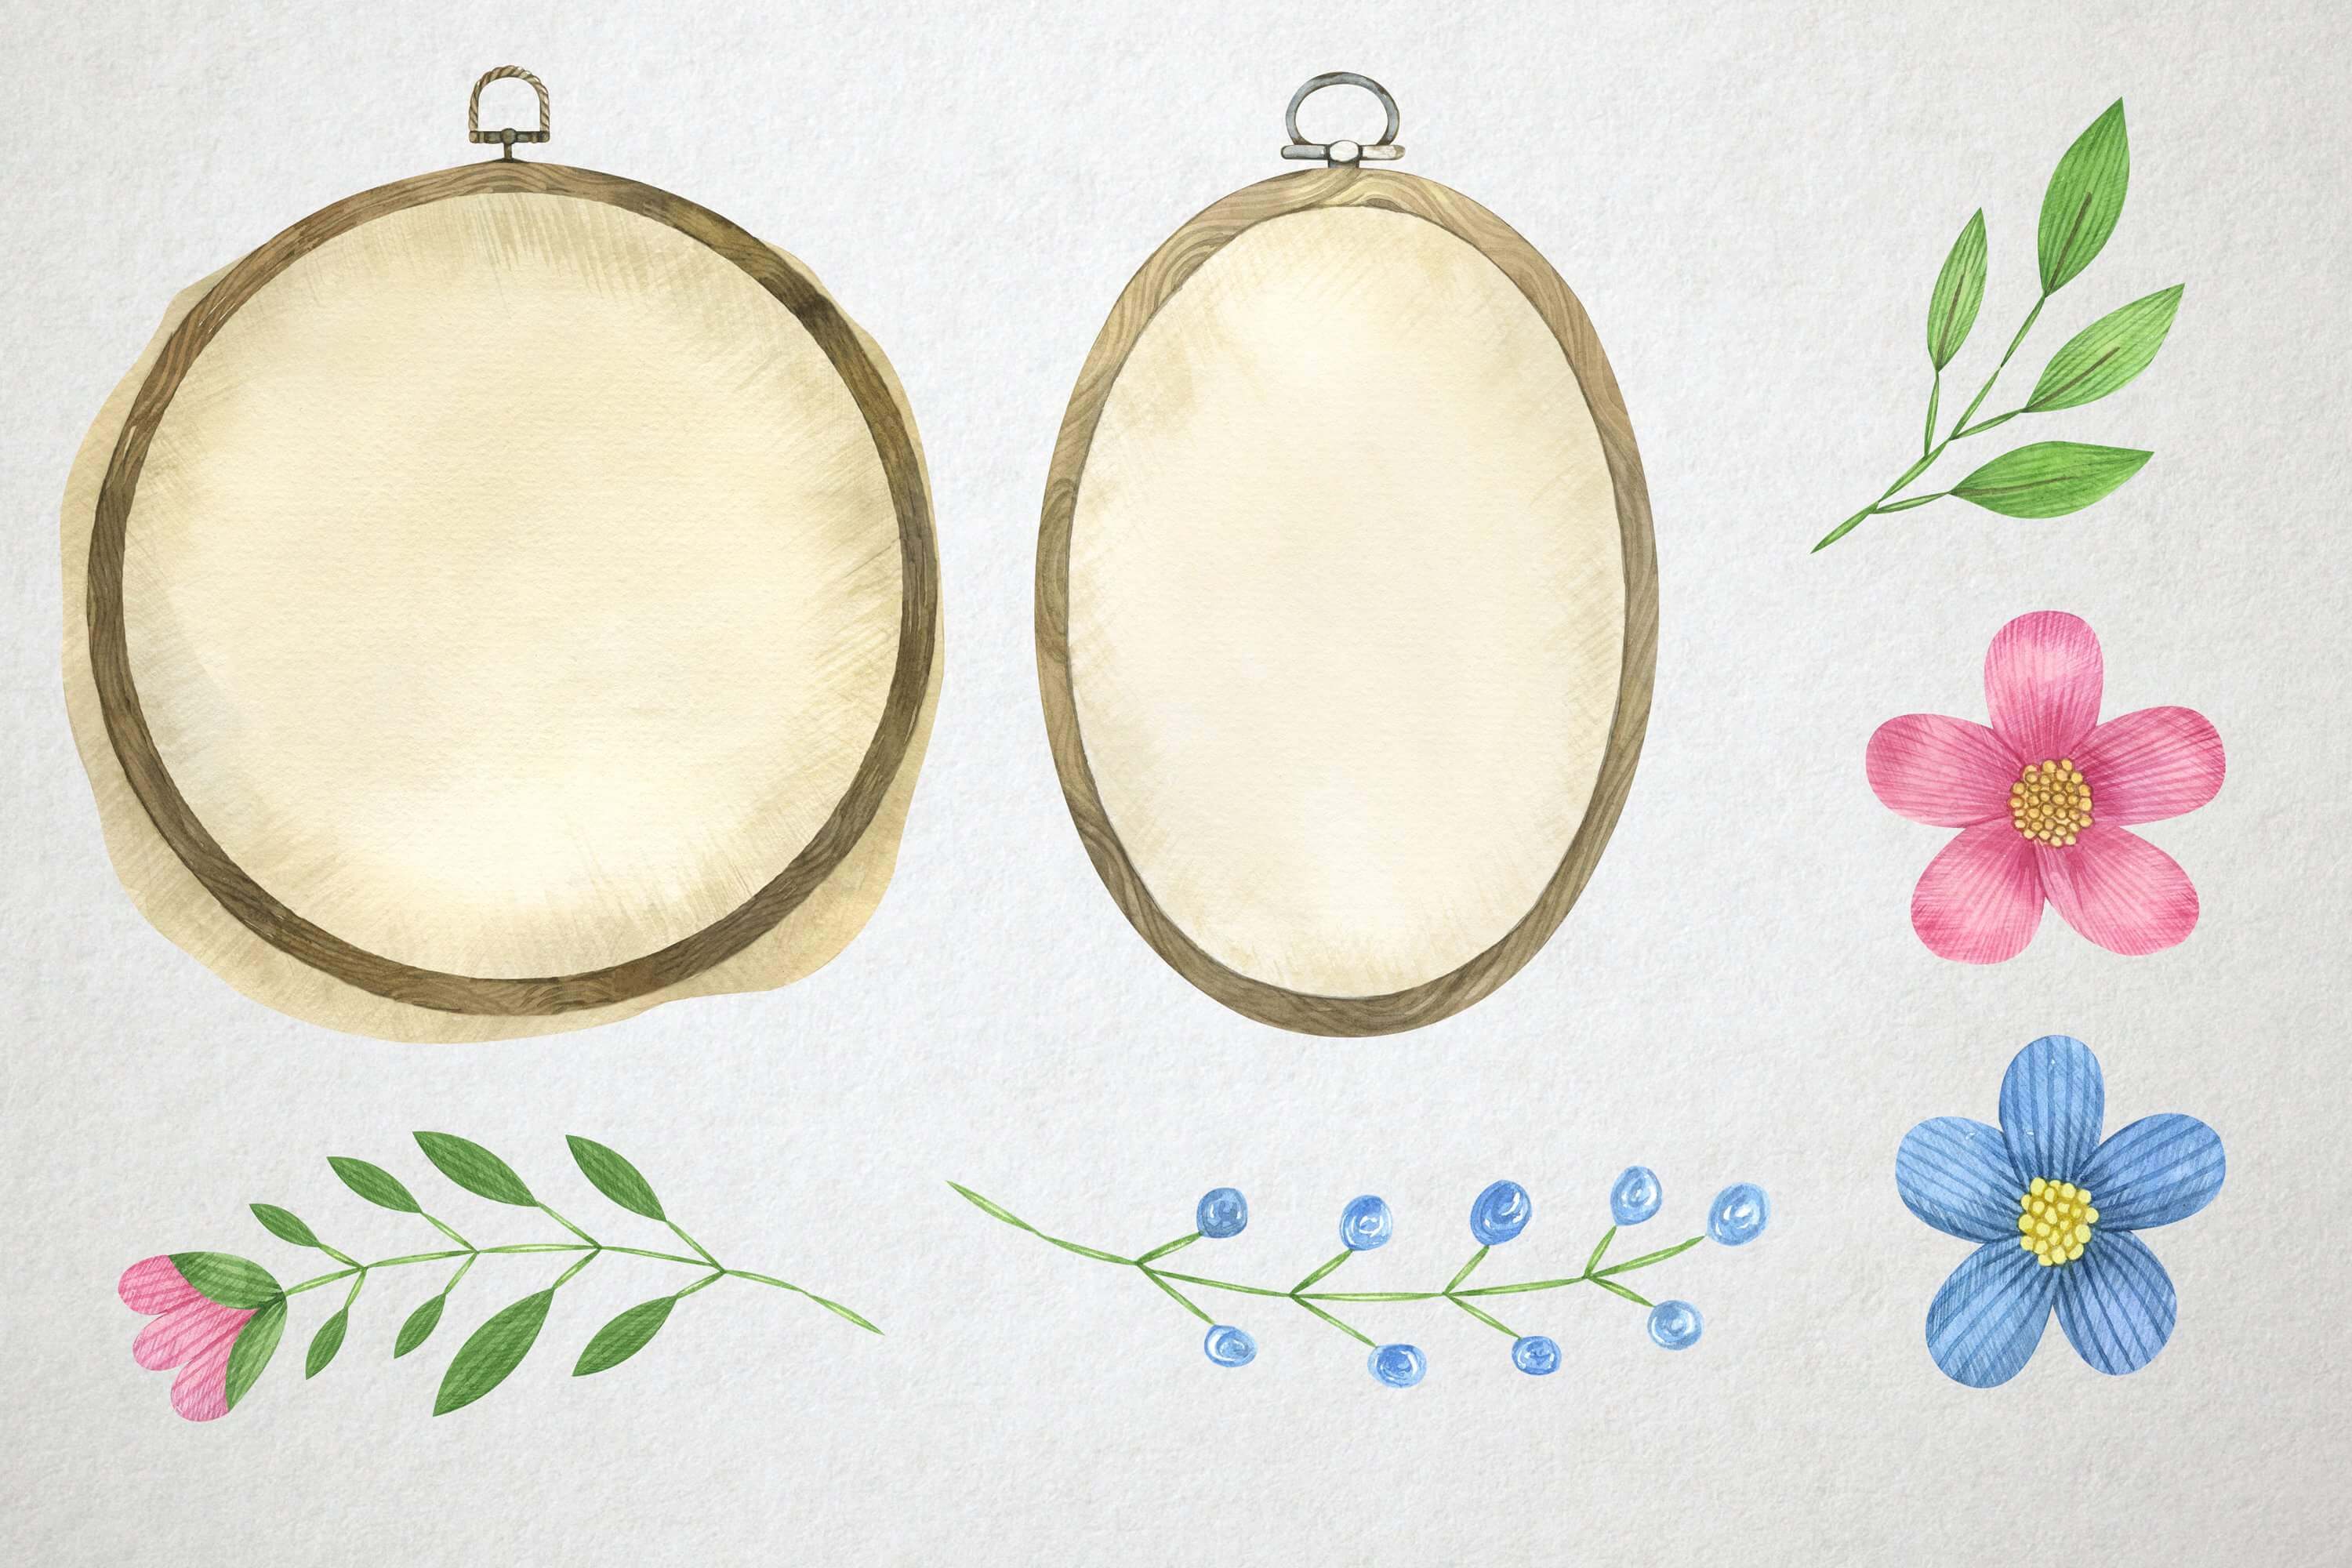 Watercolor image of two hoops and embroidered flowers and leaves.